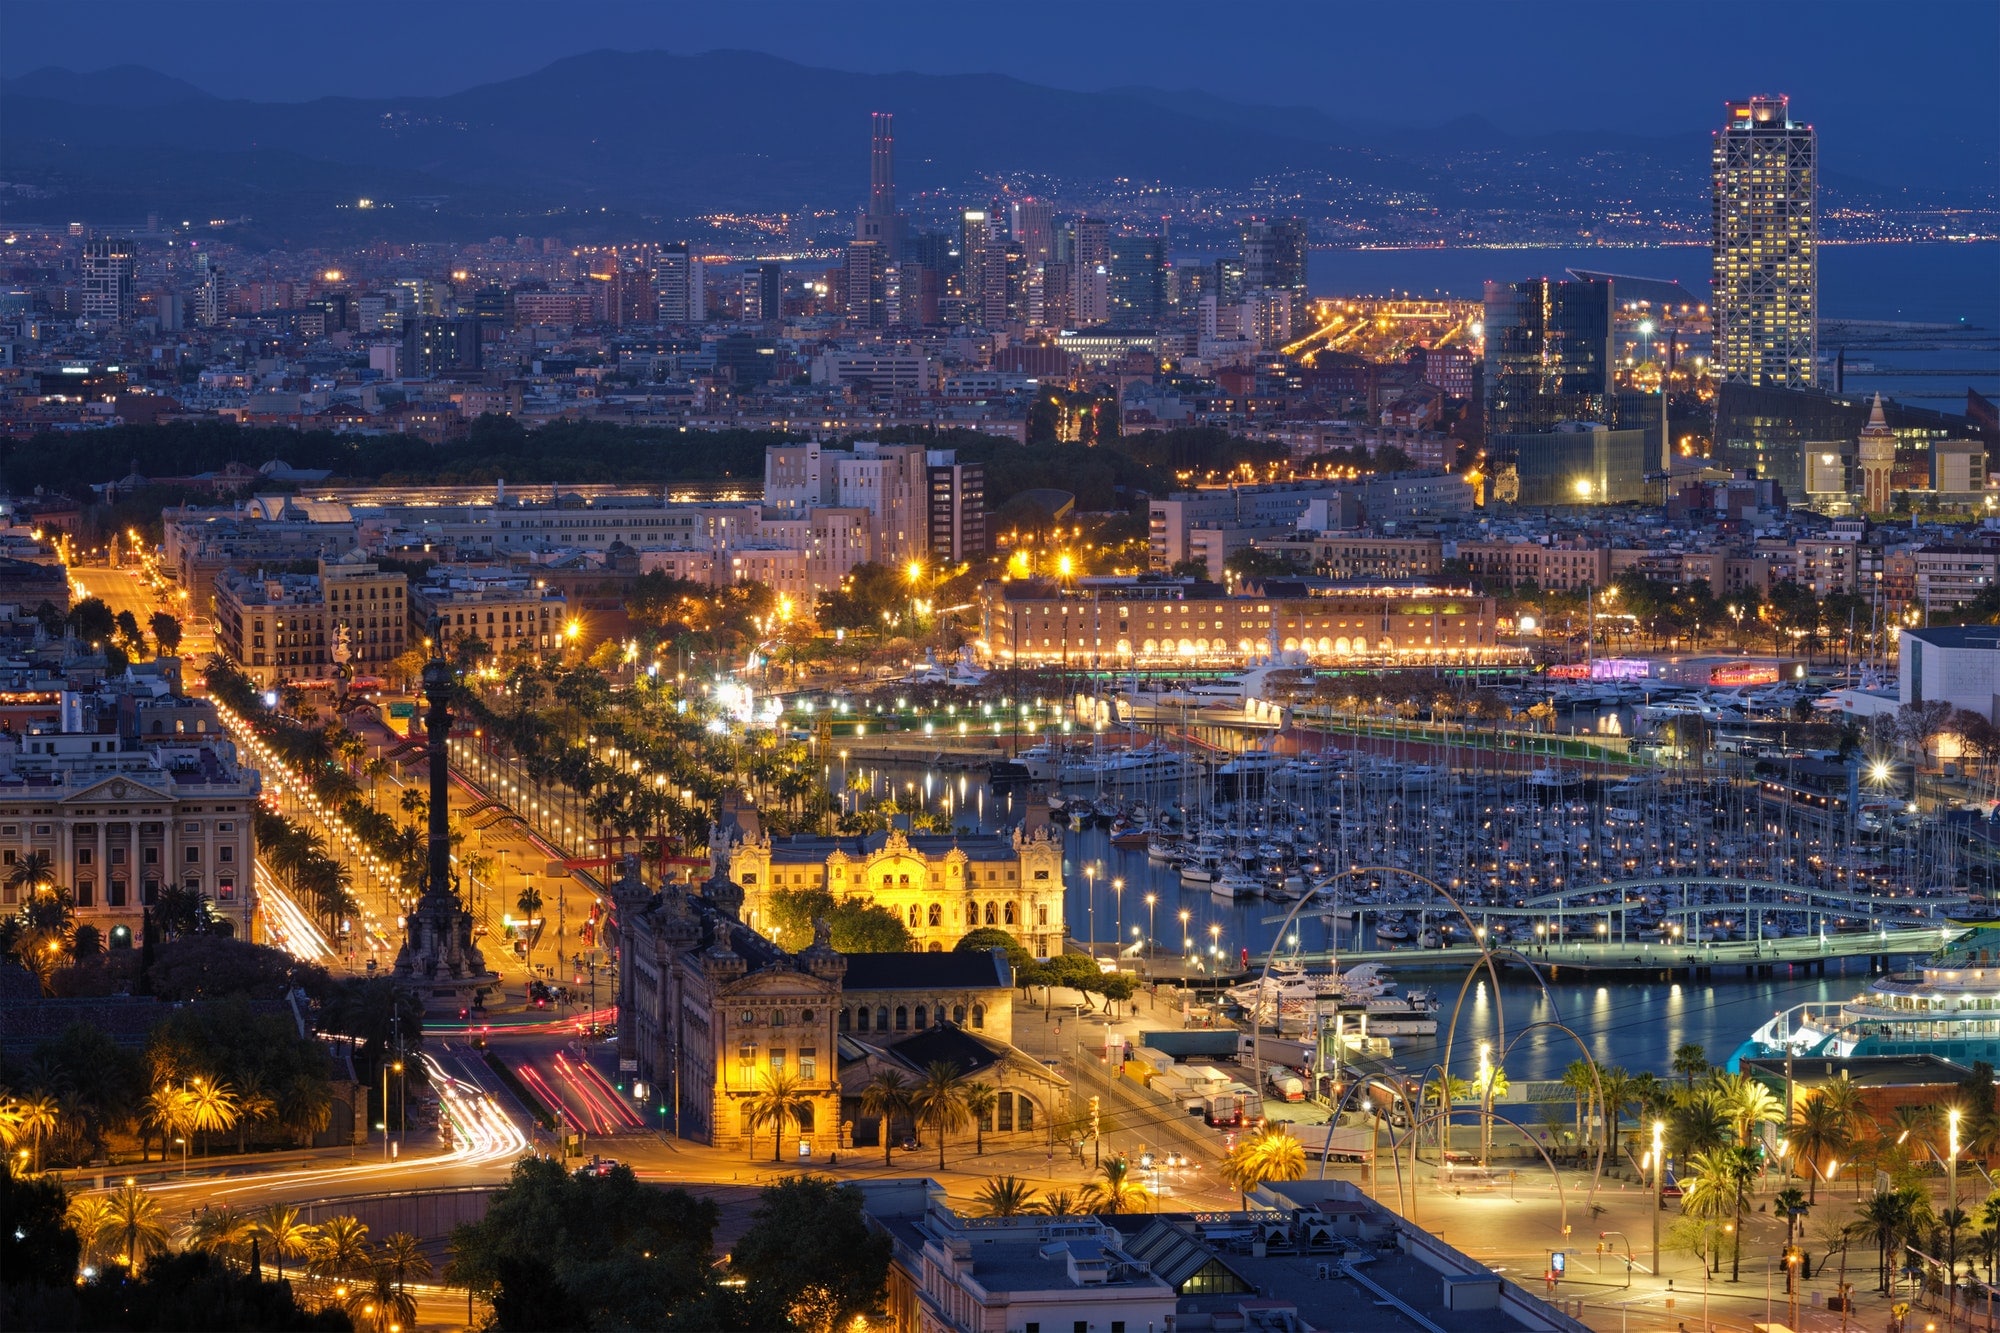 Aerial view of Barcelona city and port with yachts